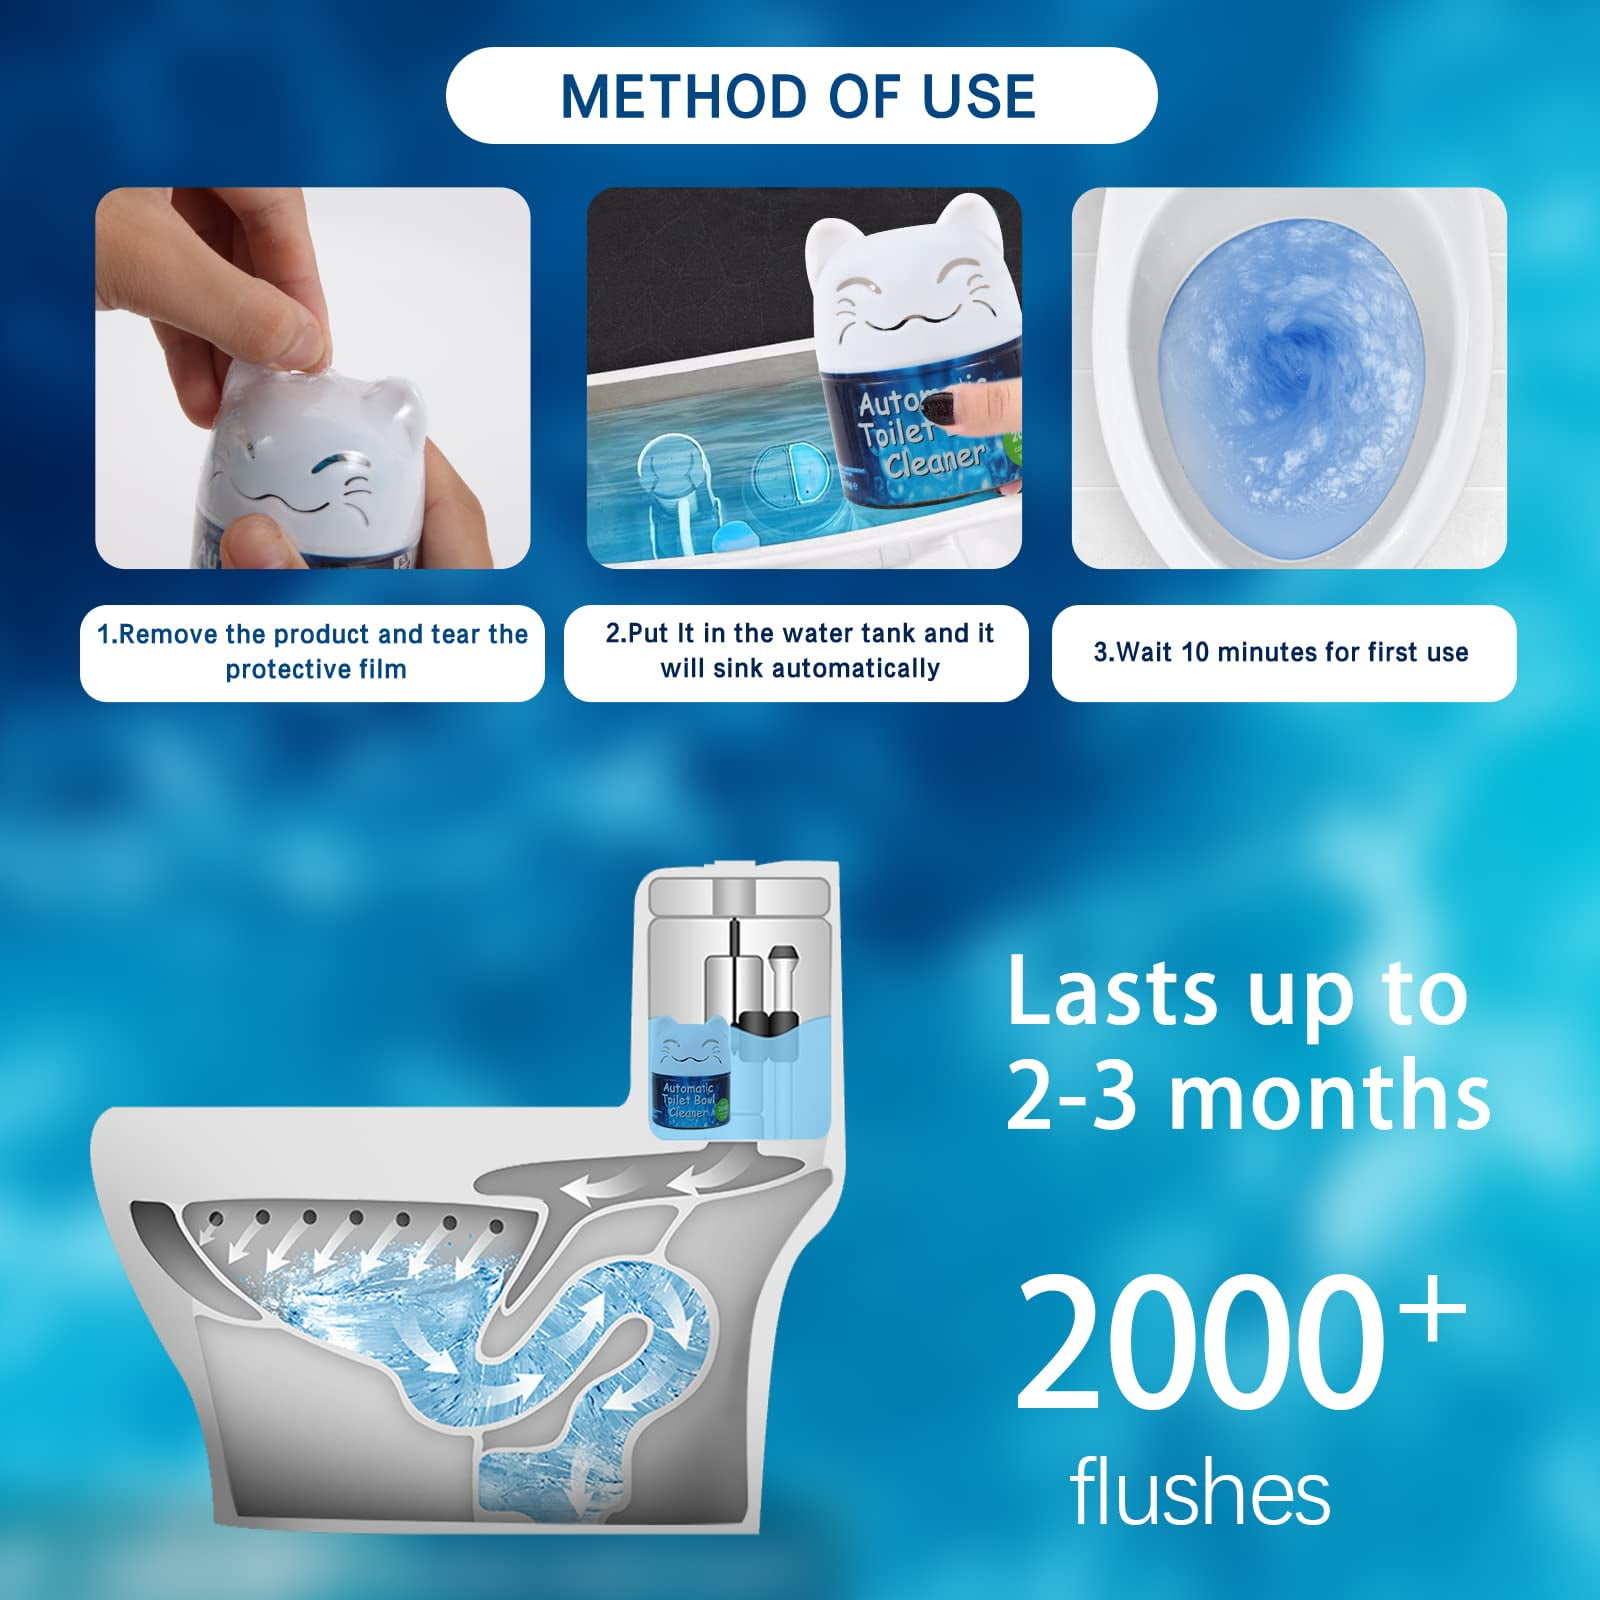 Affordable Automatic Toilet Bowl Cleaning Systems